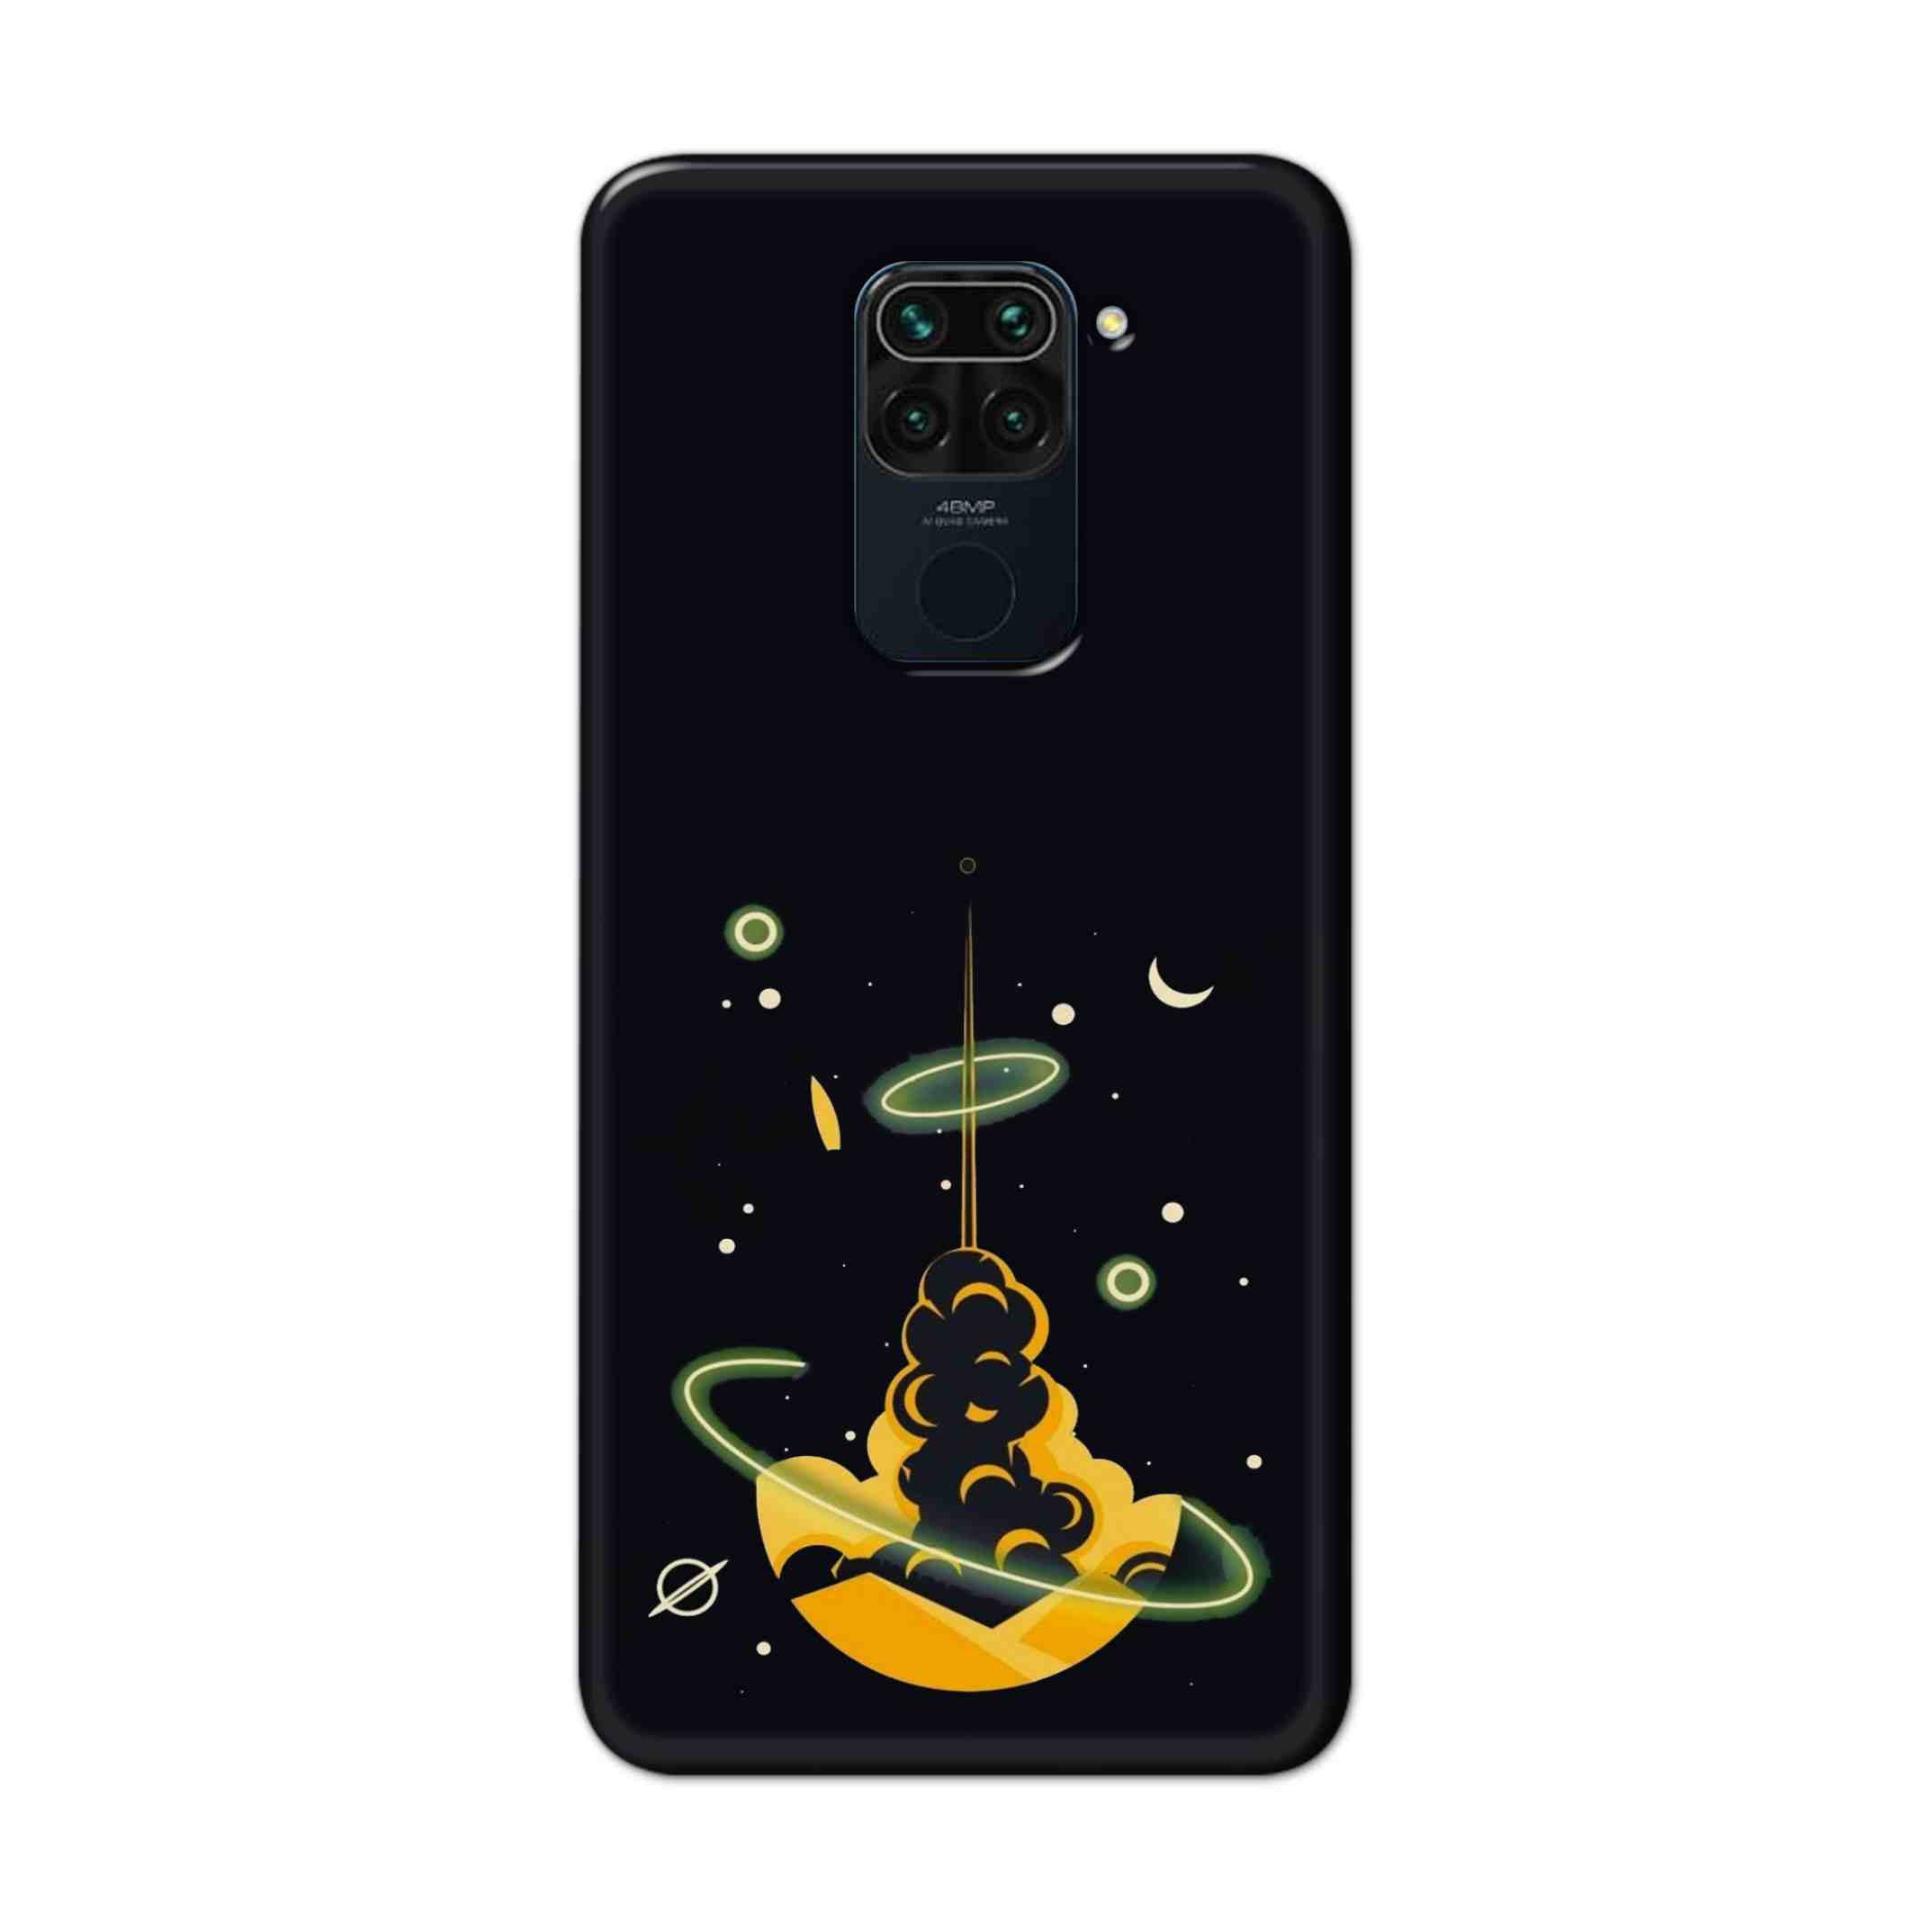 Buy Moon Hard Back Mobile Phone Case Cover For Xiaomi Redmi Note 9 Online